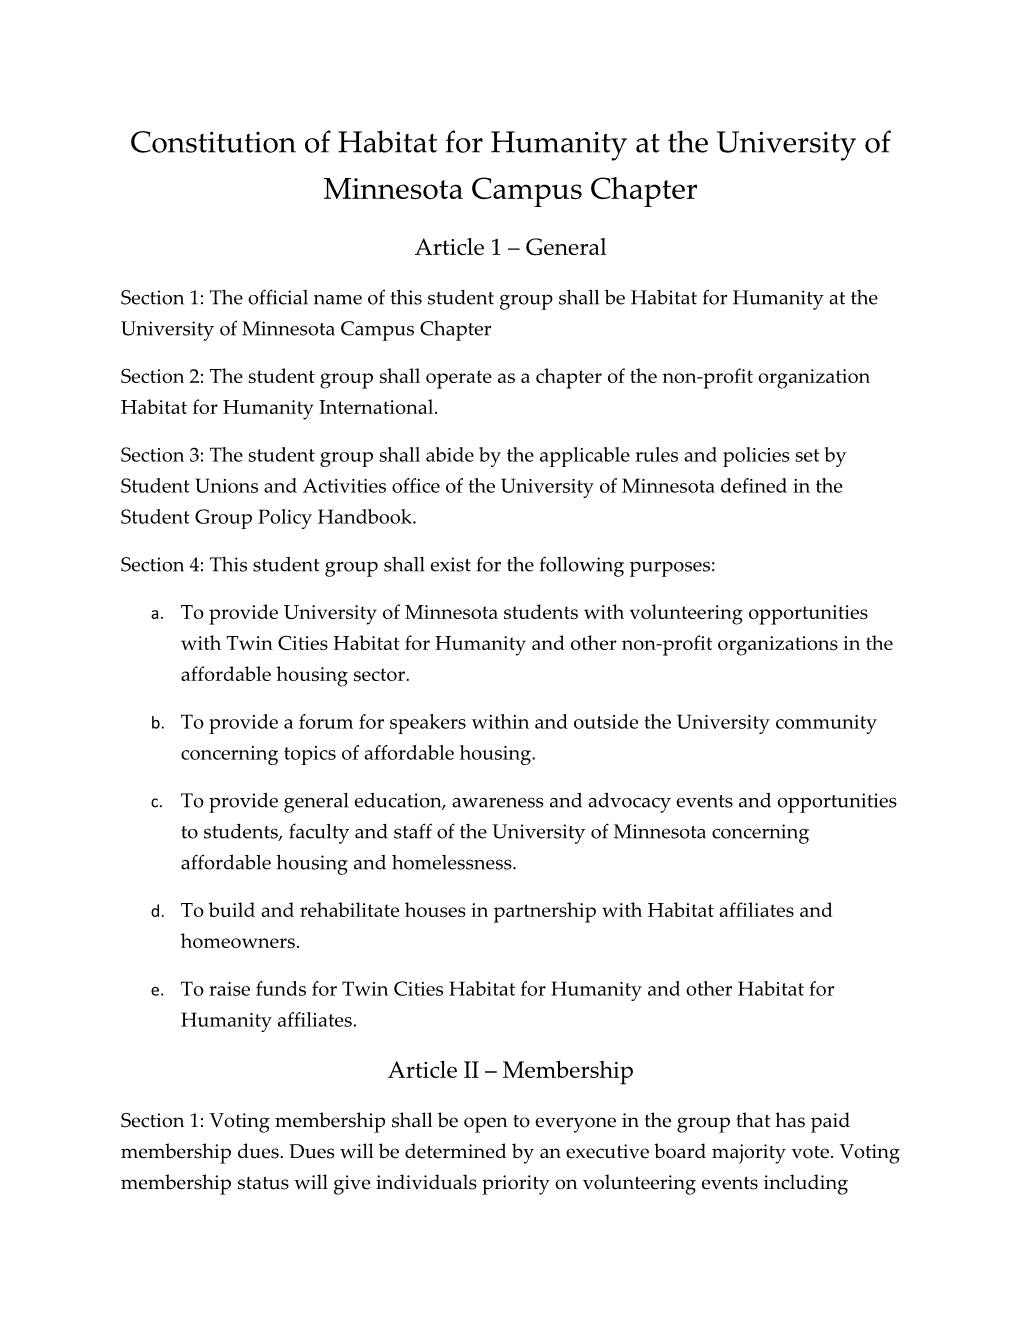 Constitution of Habitat for Humanity at the University of Minnesota Campus Chapter